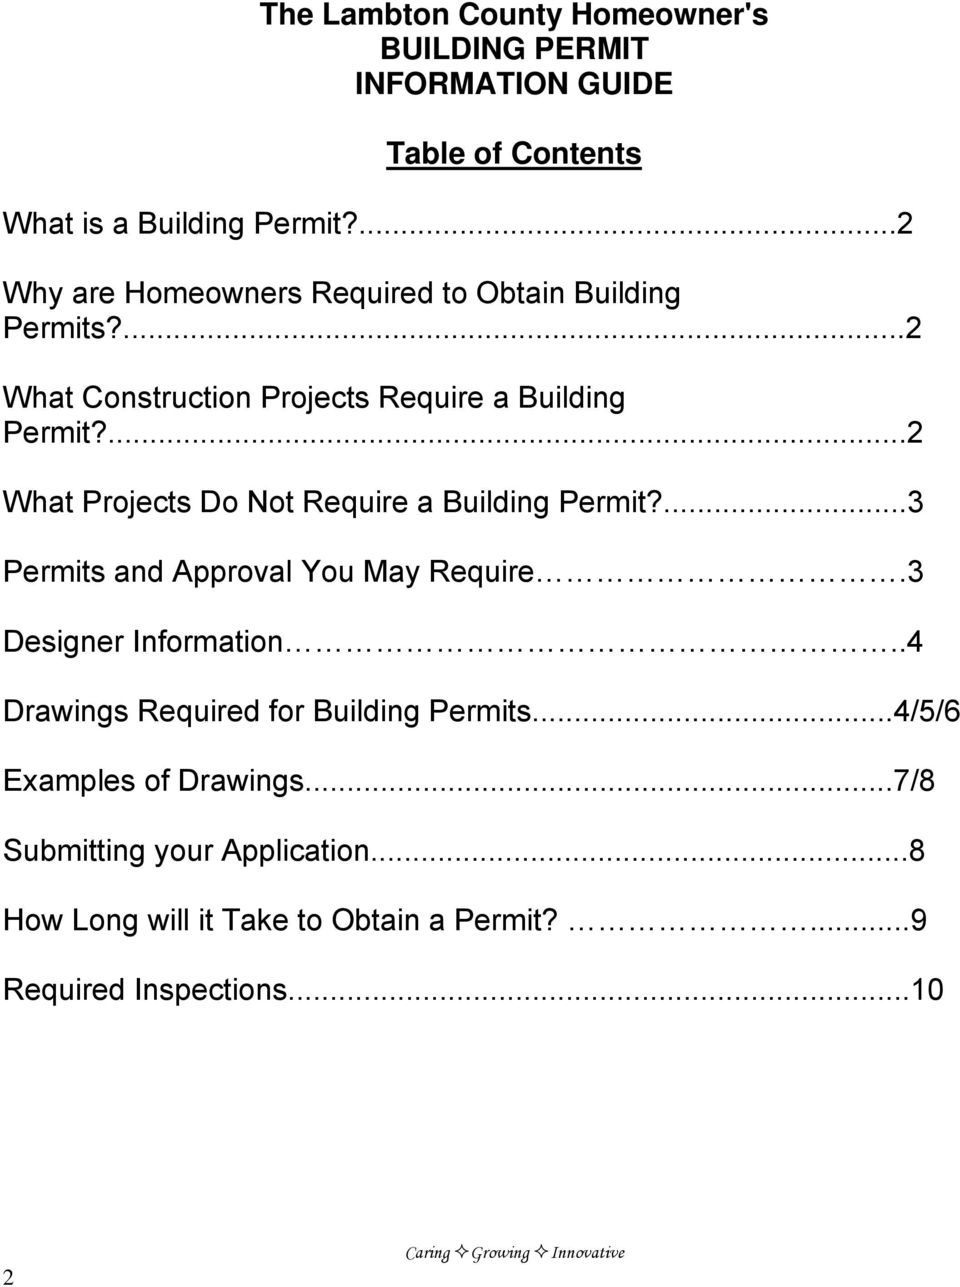 ...2 What Projects Do Not Require a Building Permit?...3 Permits and Approval You May Require.3 Designer Information.